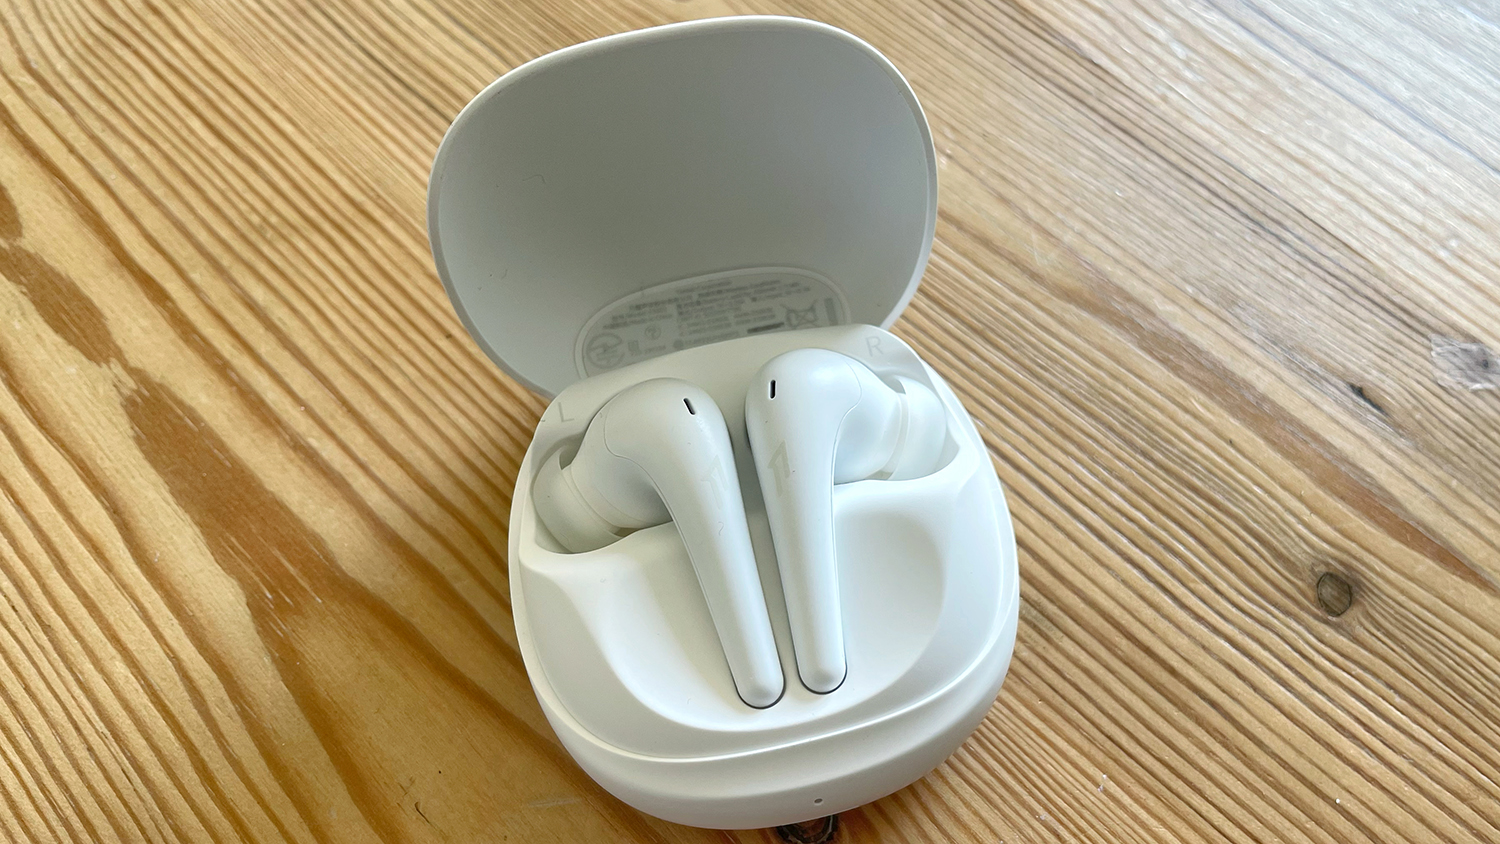 The 1More Aero true wireless earbuds in their charging case